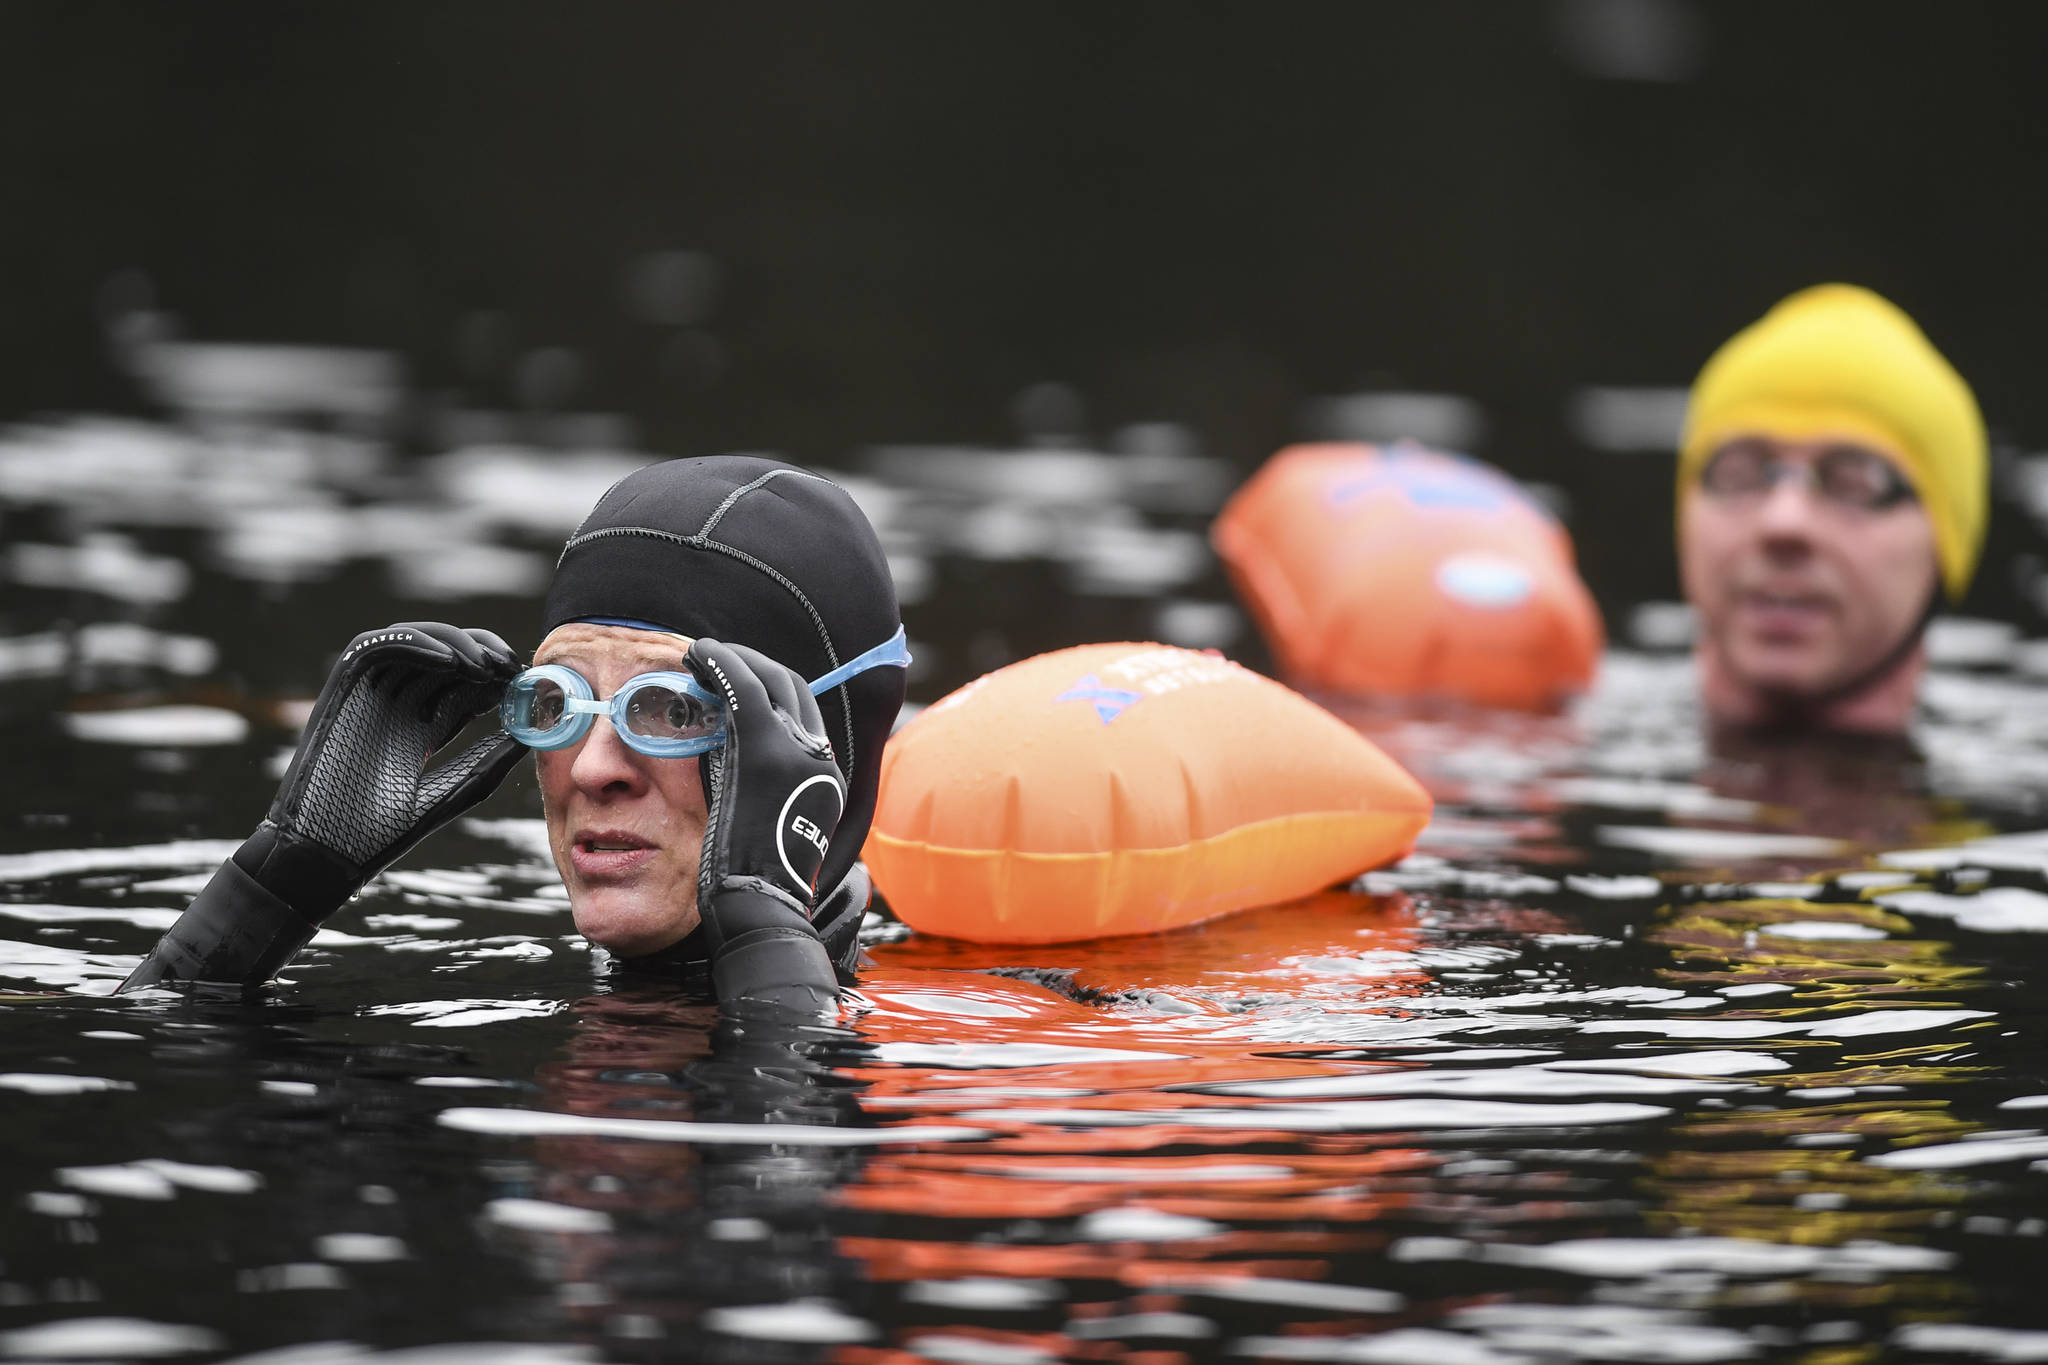 Serenity in the dark: How Auke Lake became a go-to swimming destination